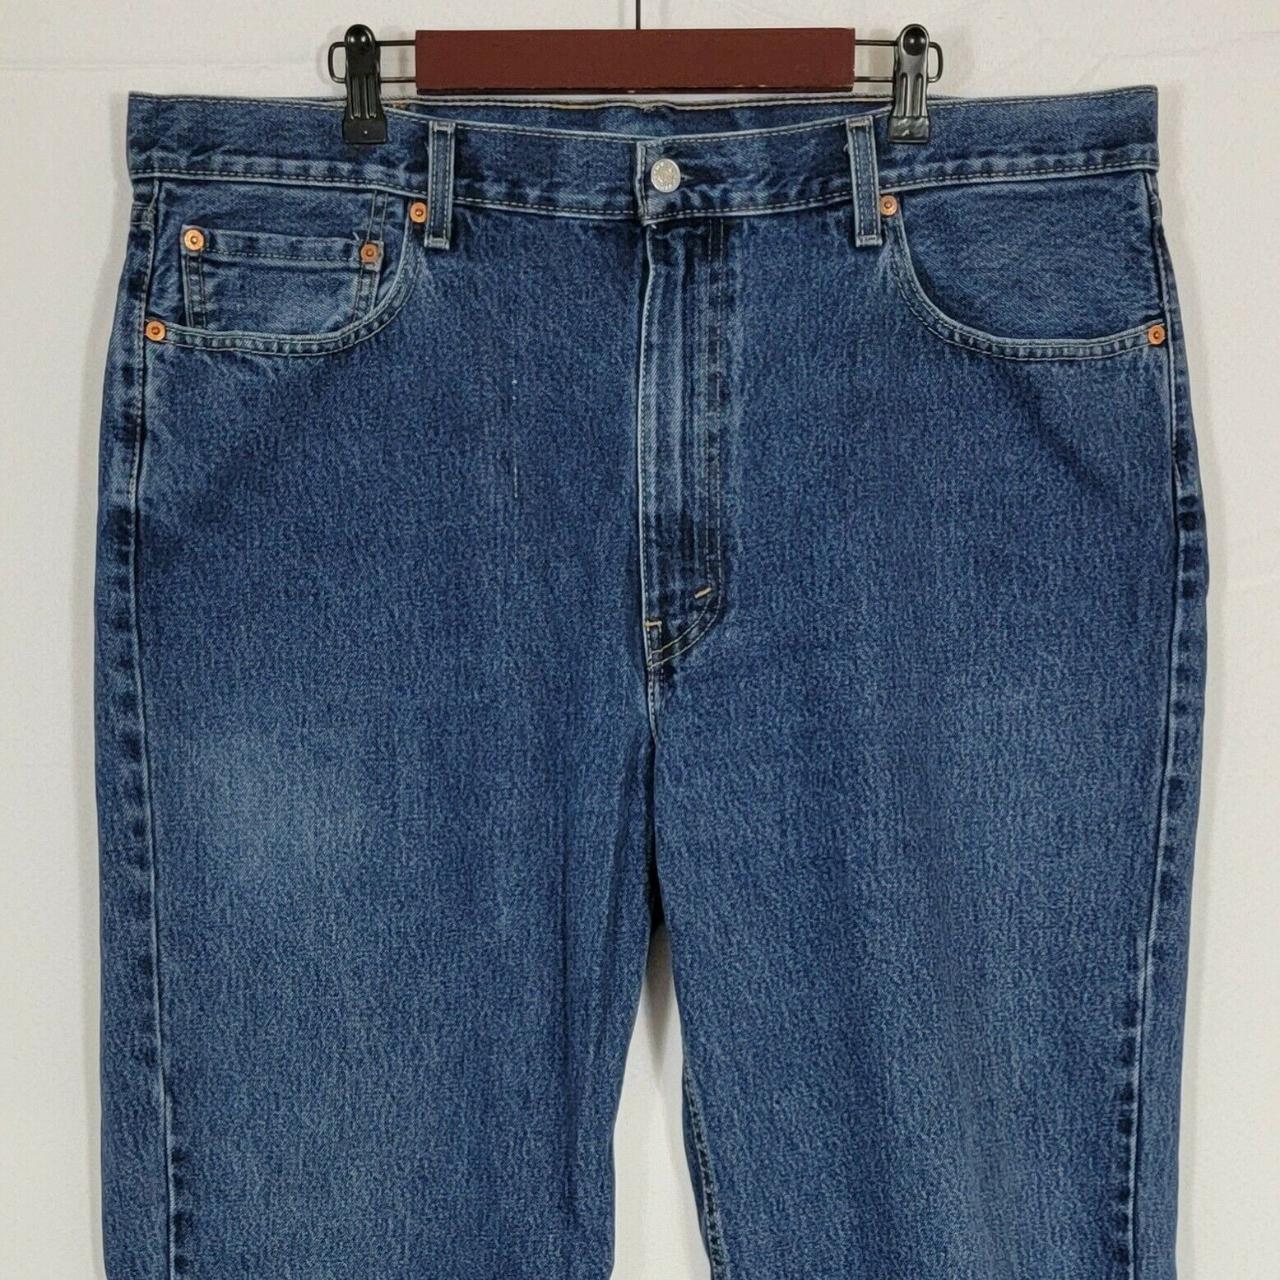 Levi's 550 Jeans Men's 42 x 36 Relaxed Fit Straight... - Depop